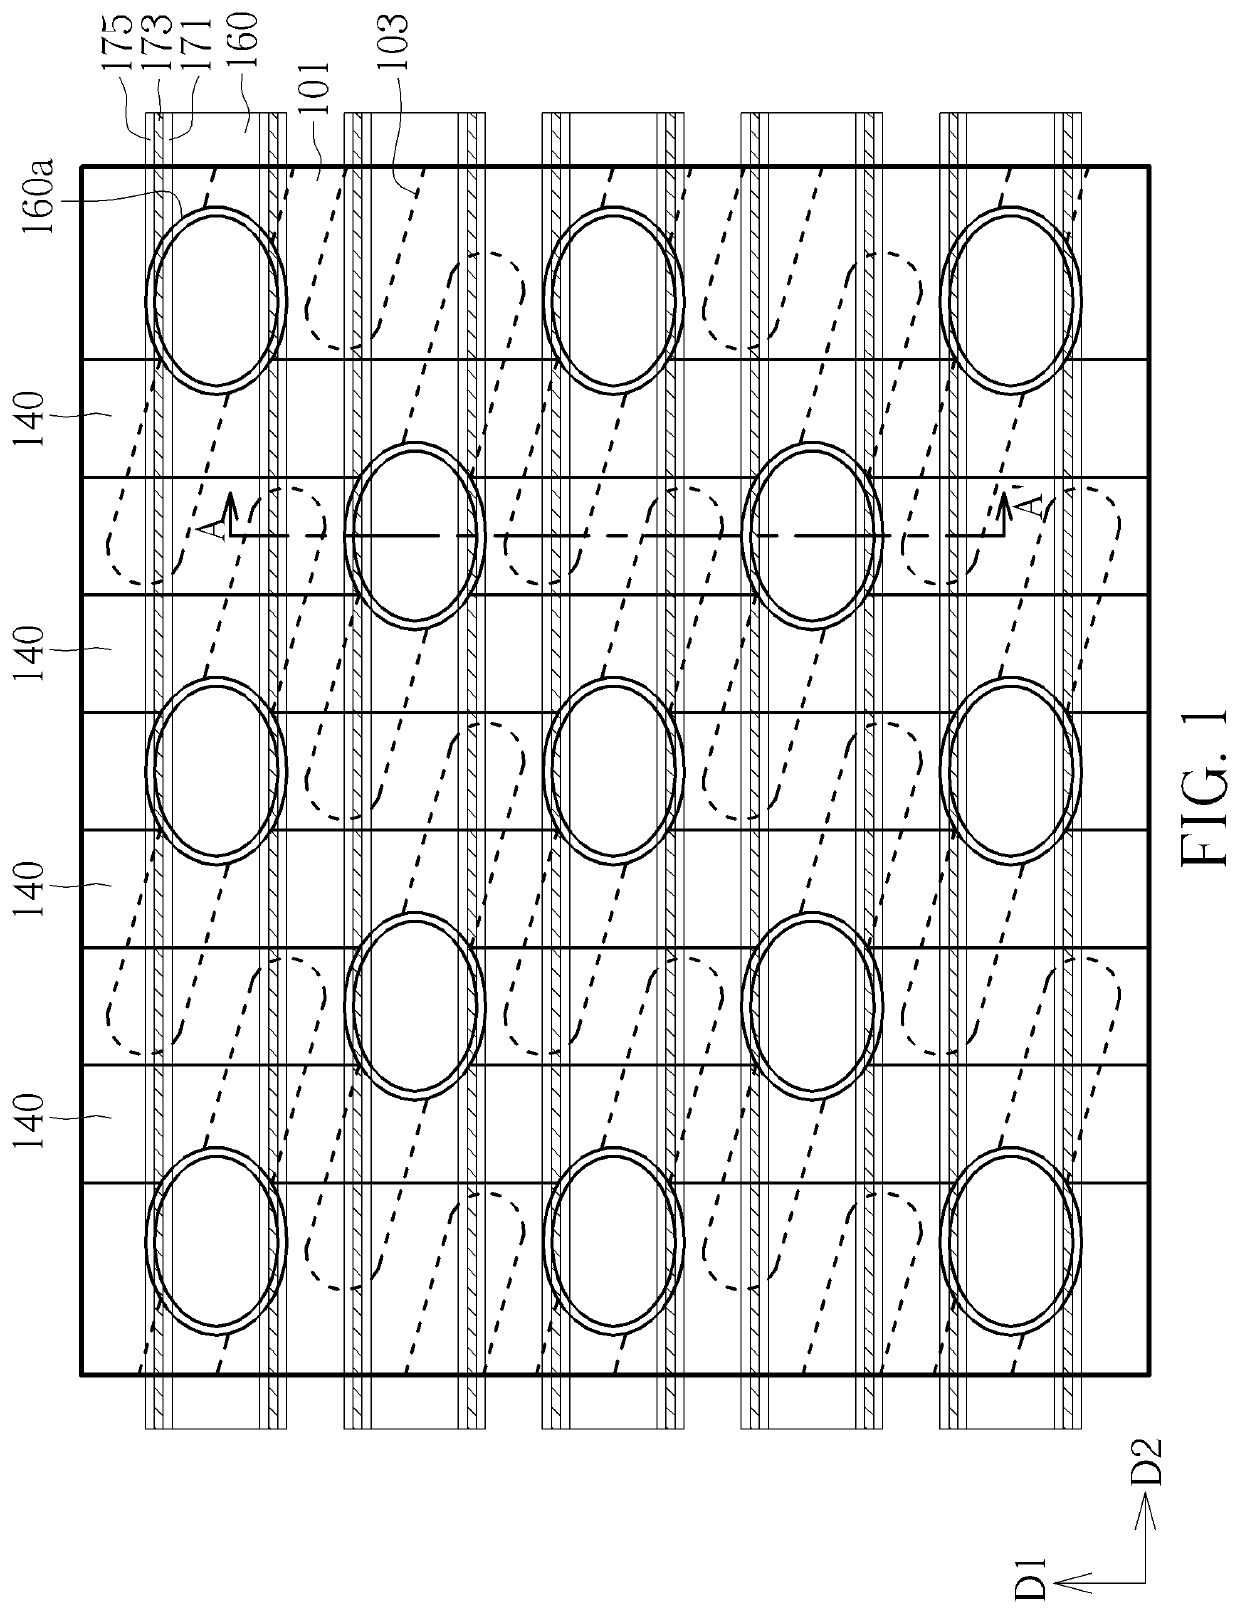 Method of forming a semiconductor memory device with a laterally etched bottom dielectric layer